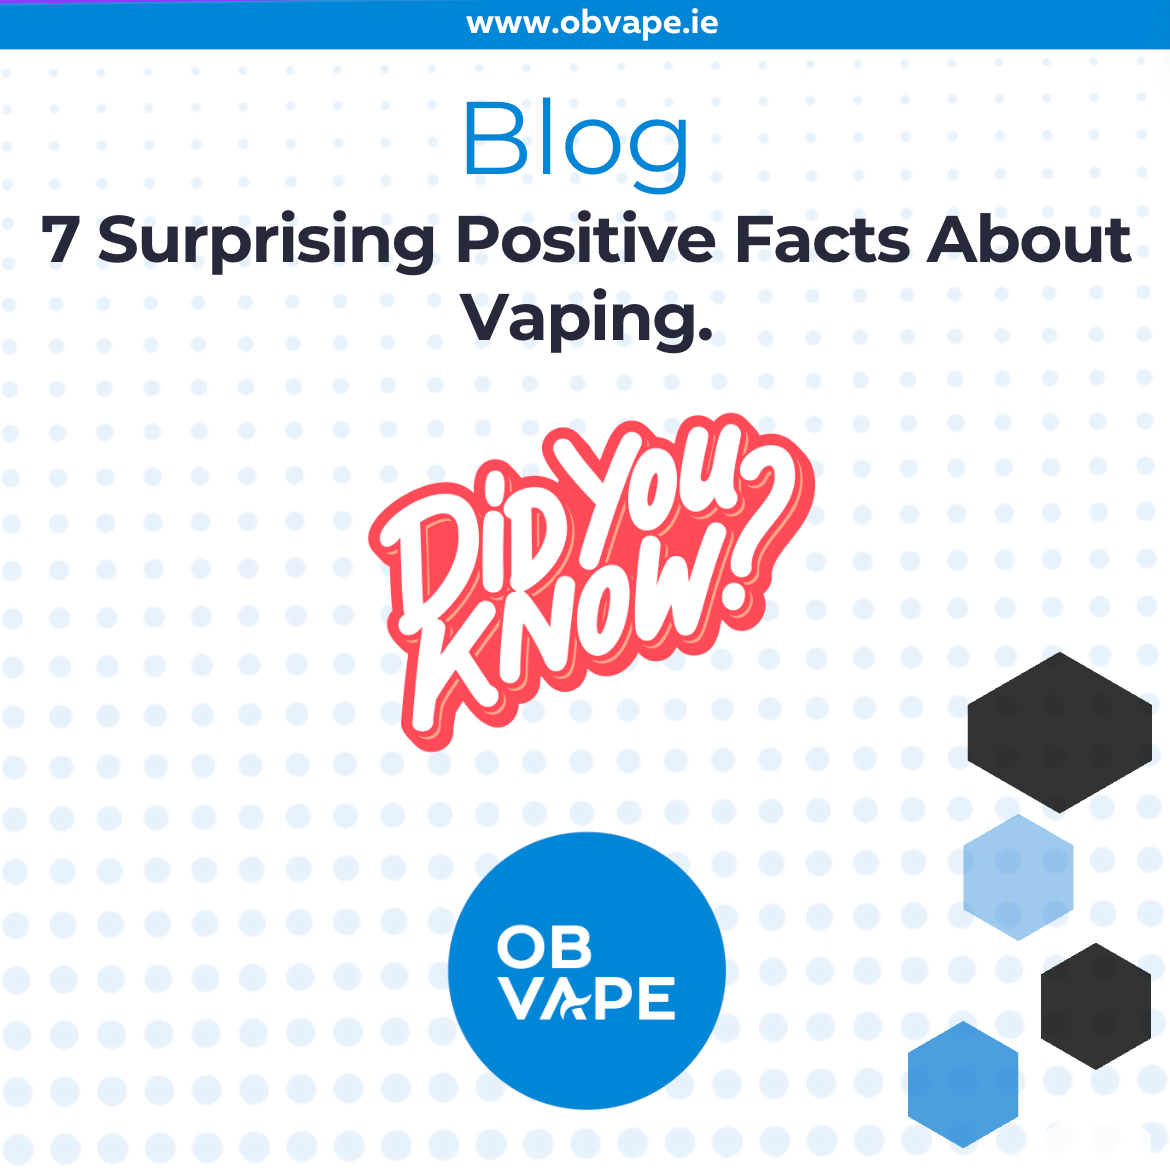 7 Surprising Positive Facts About Vaping